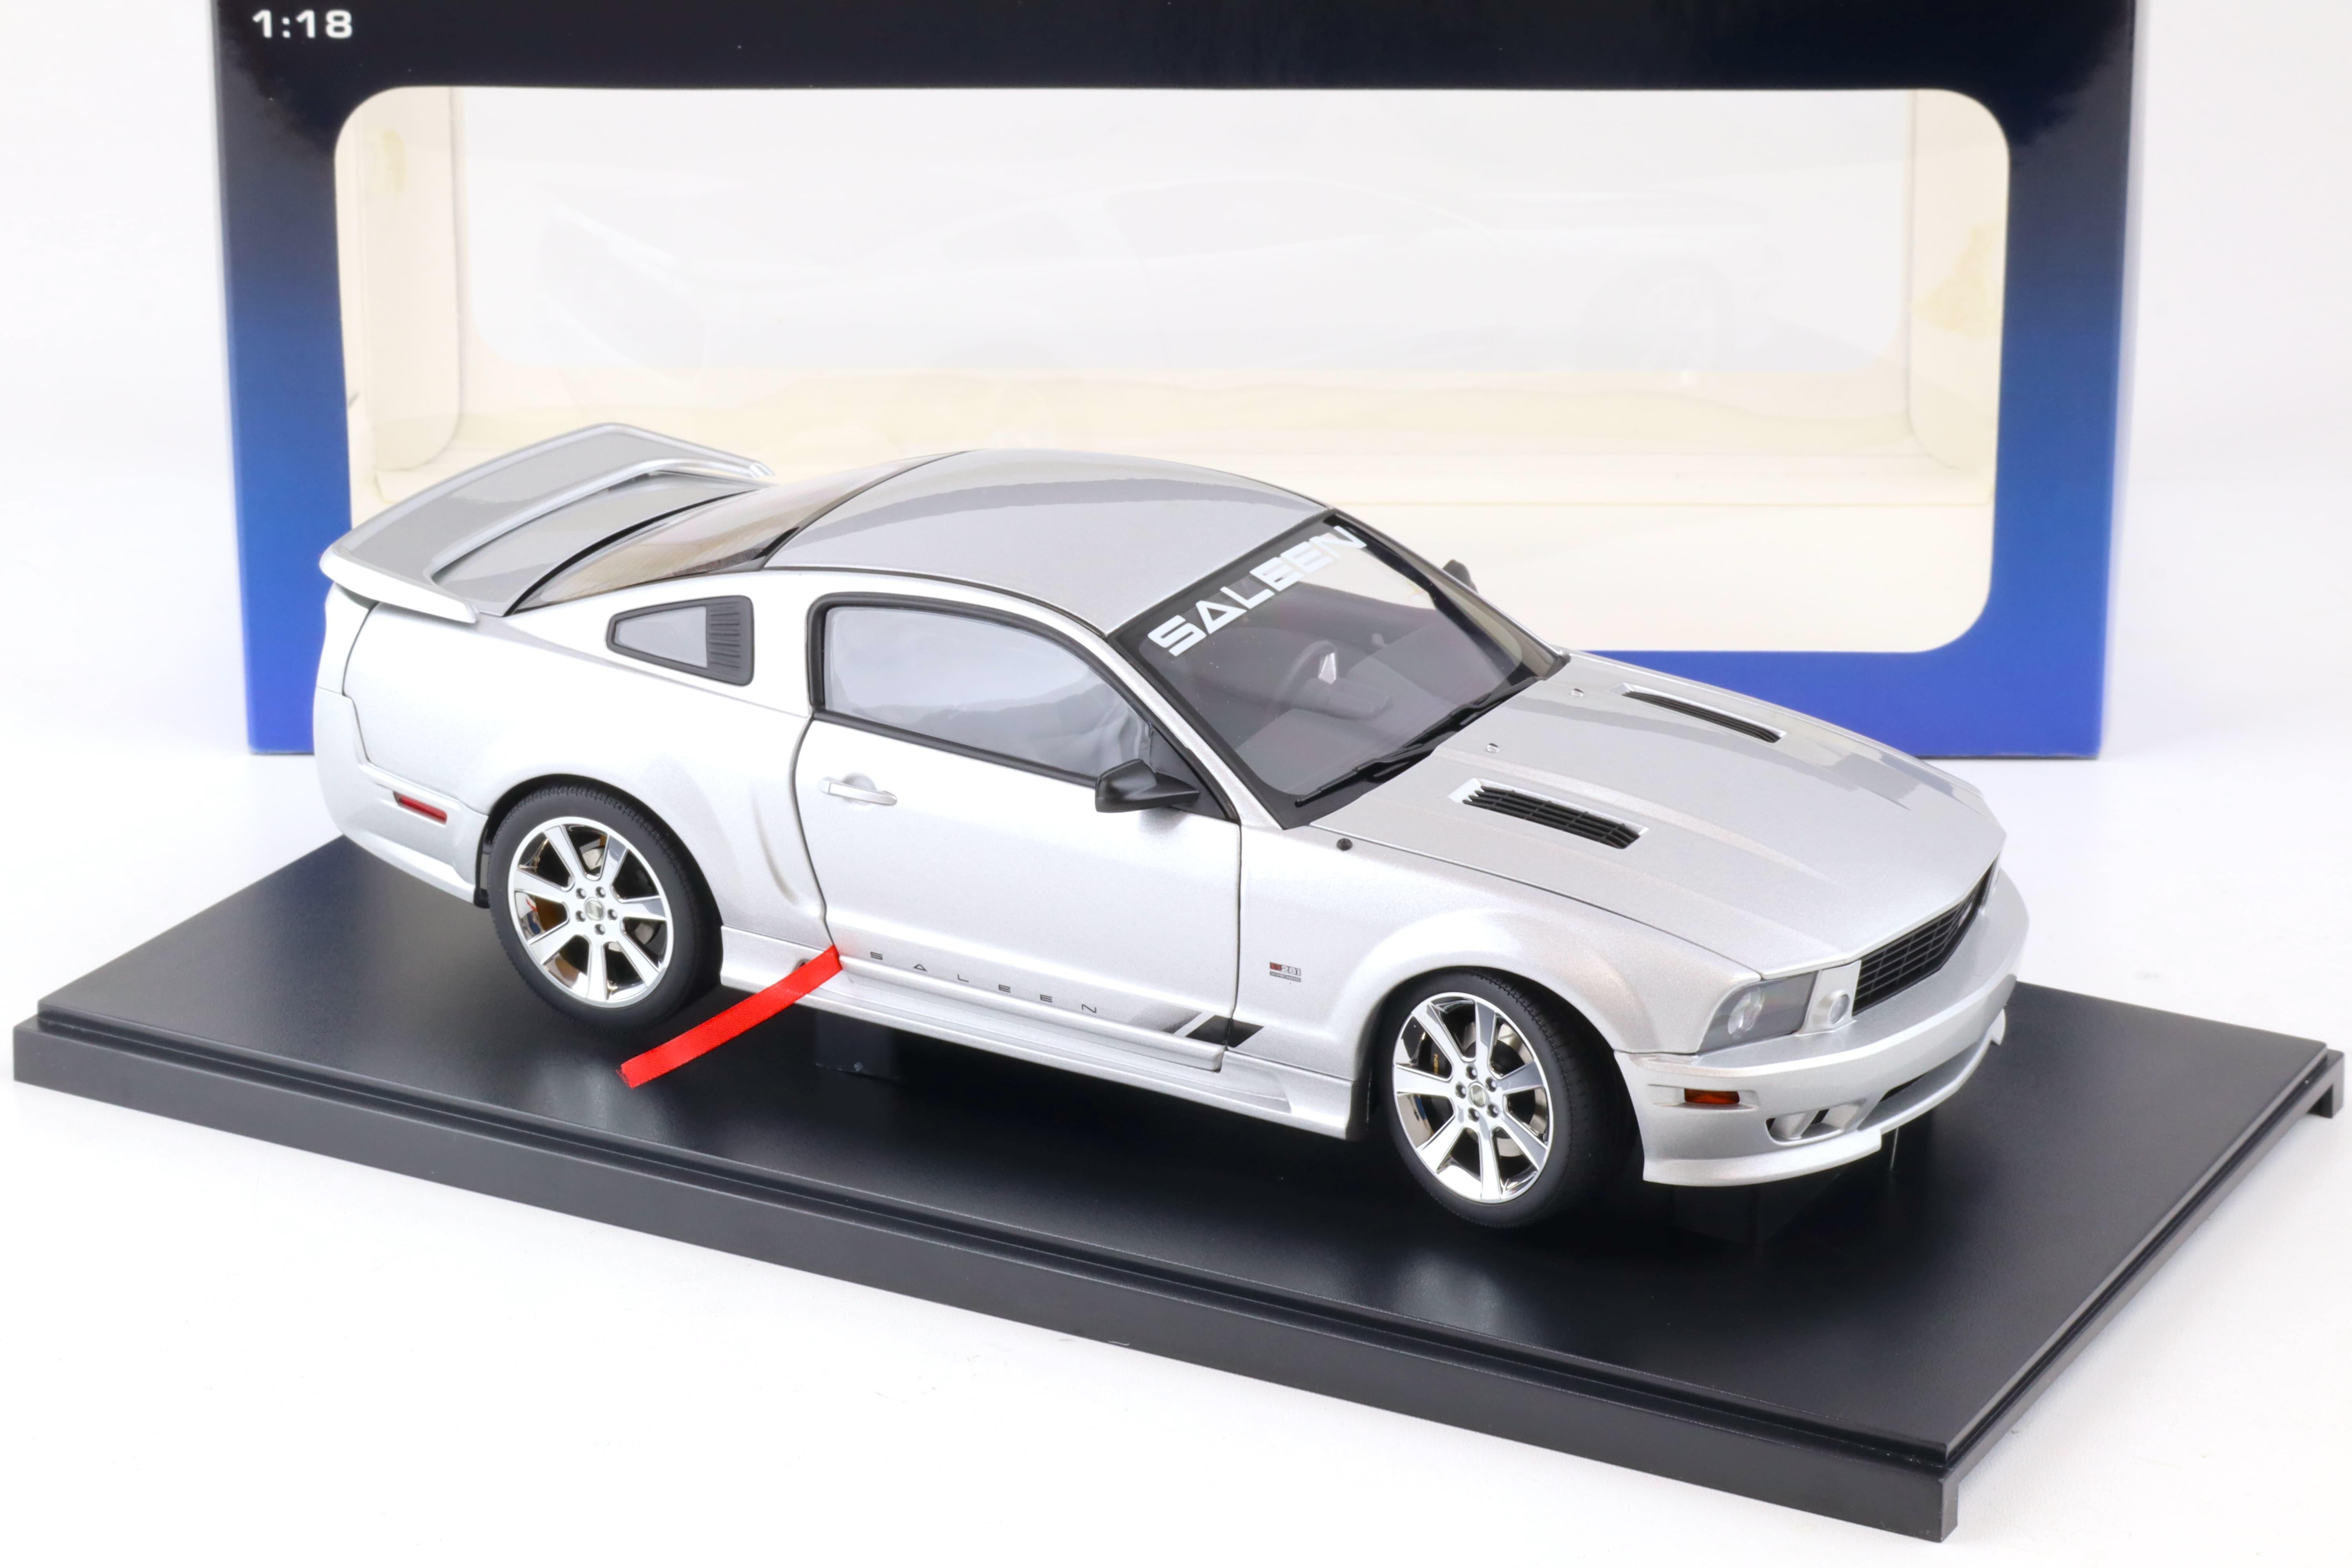 1:18 AUTOart Saleen Mustang S281 SUPERCHARGED Coupe silver 73057